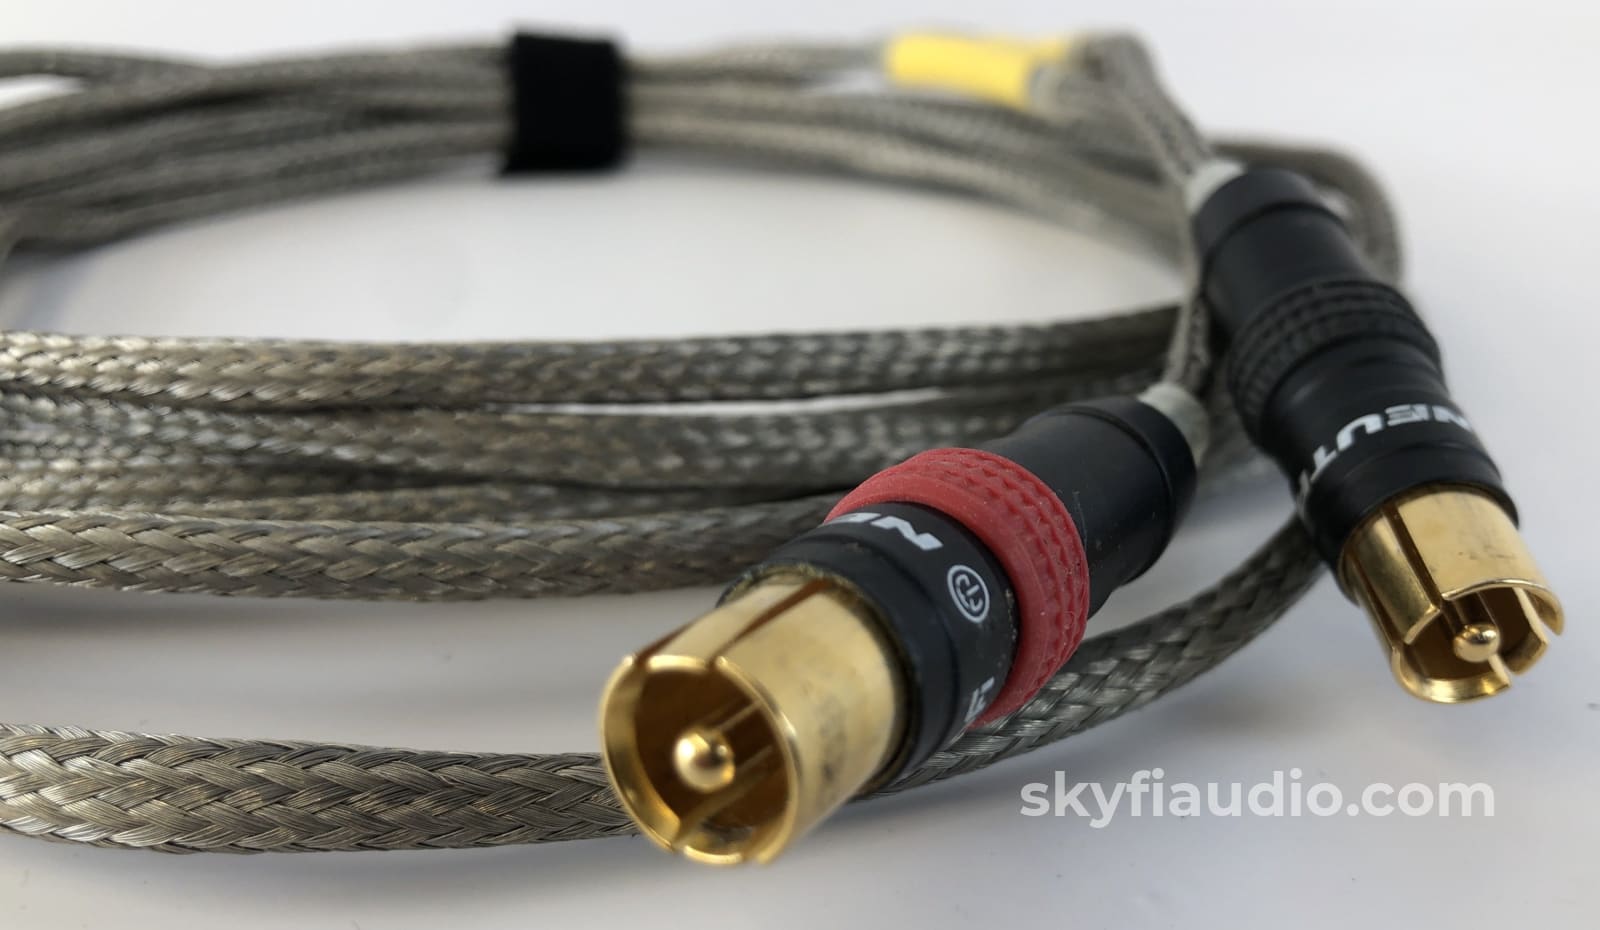 Zz Cables - Z Squared Rca Audio Cable 3M